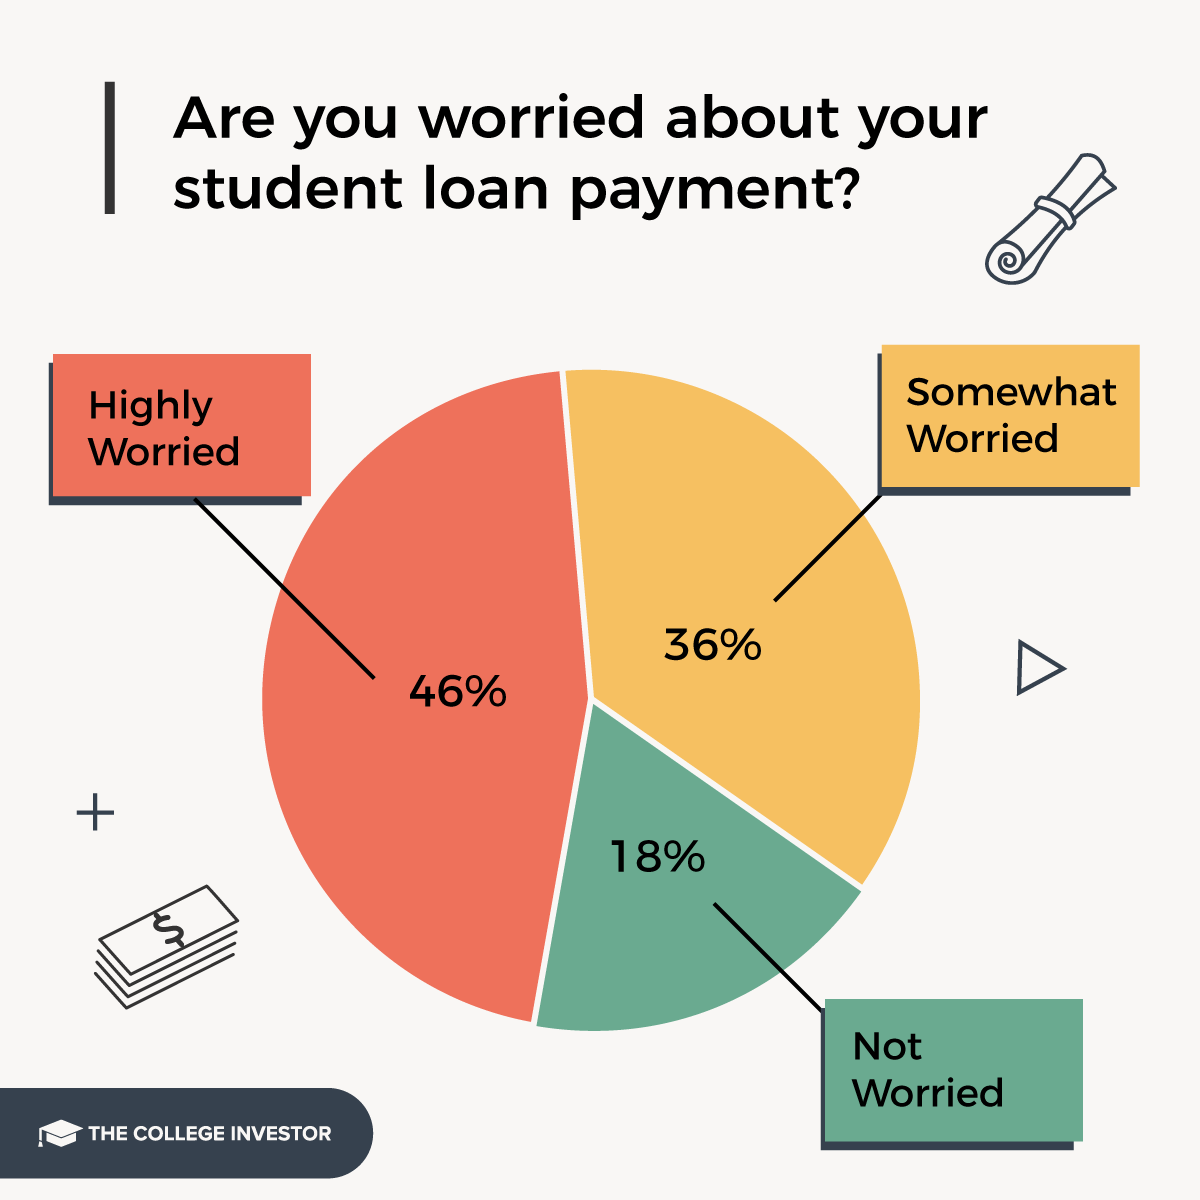 82% of borrowers are worried about their loan payments.